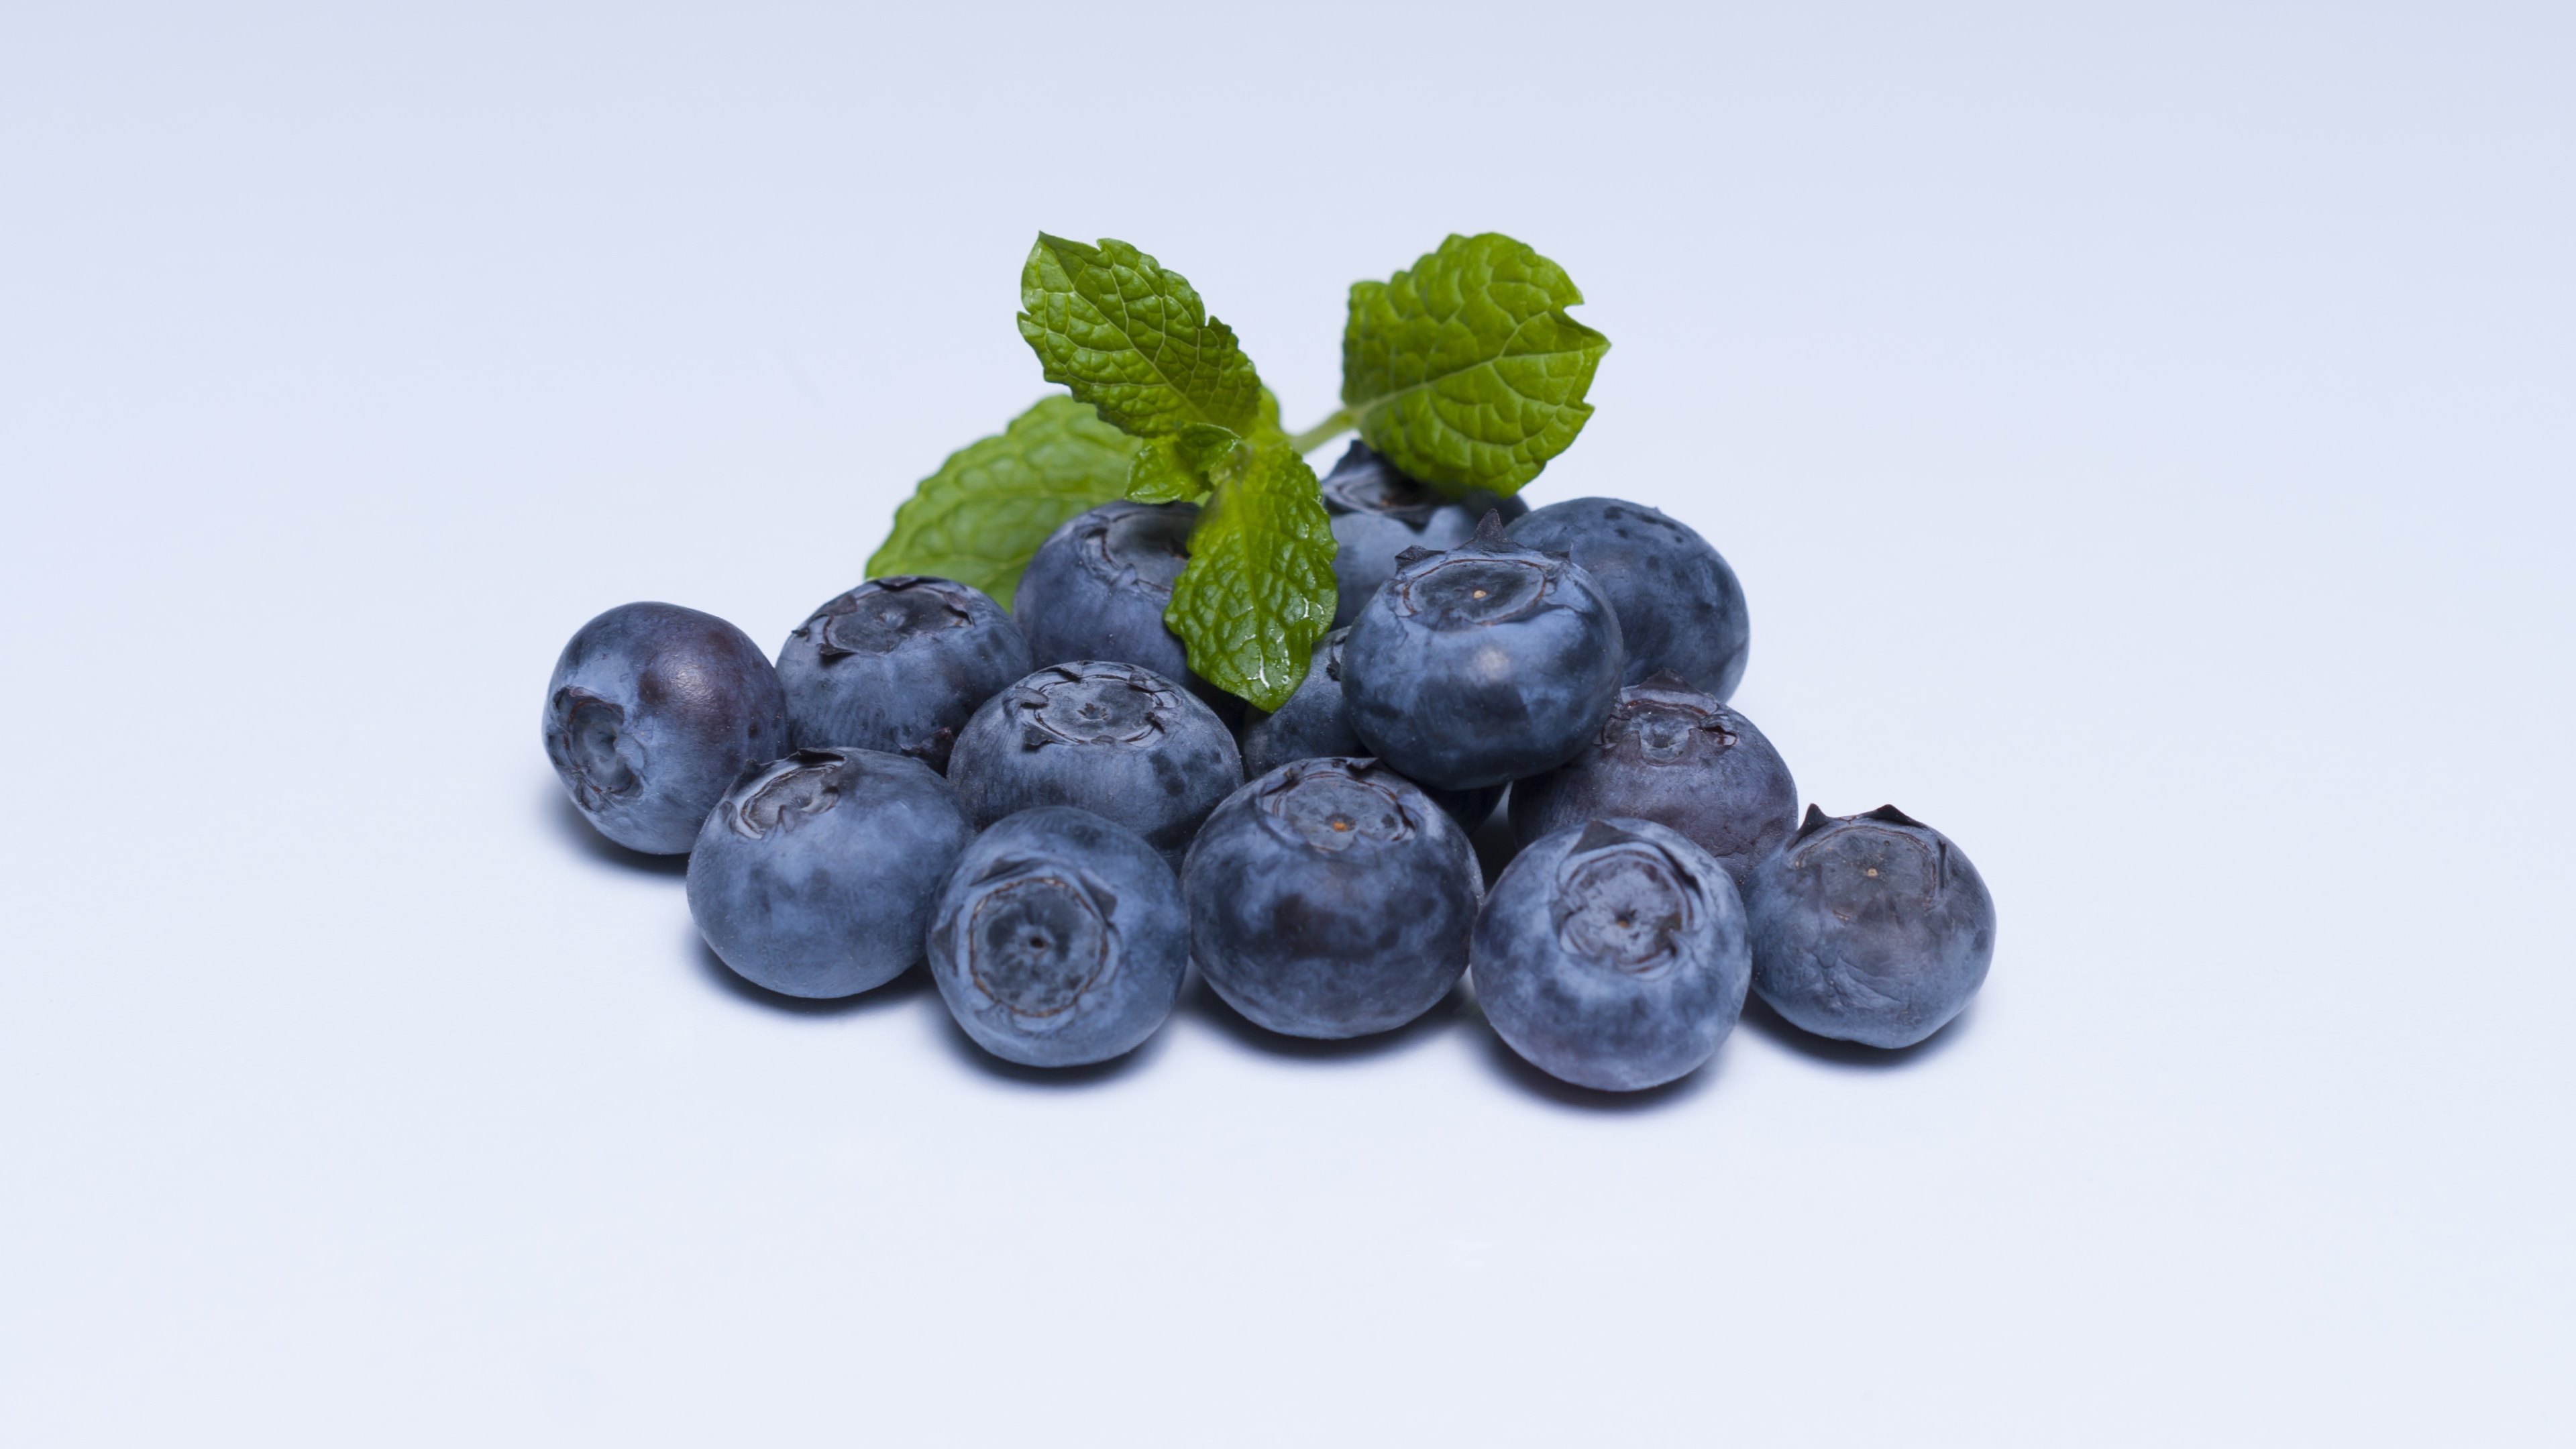 Blueberries & Mint by Gabor Mika